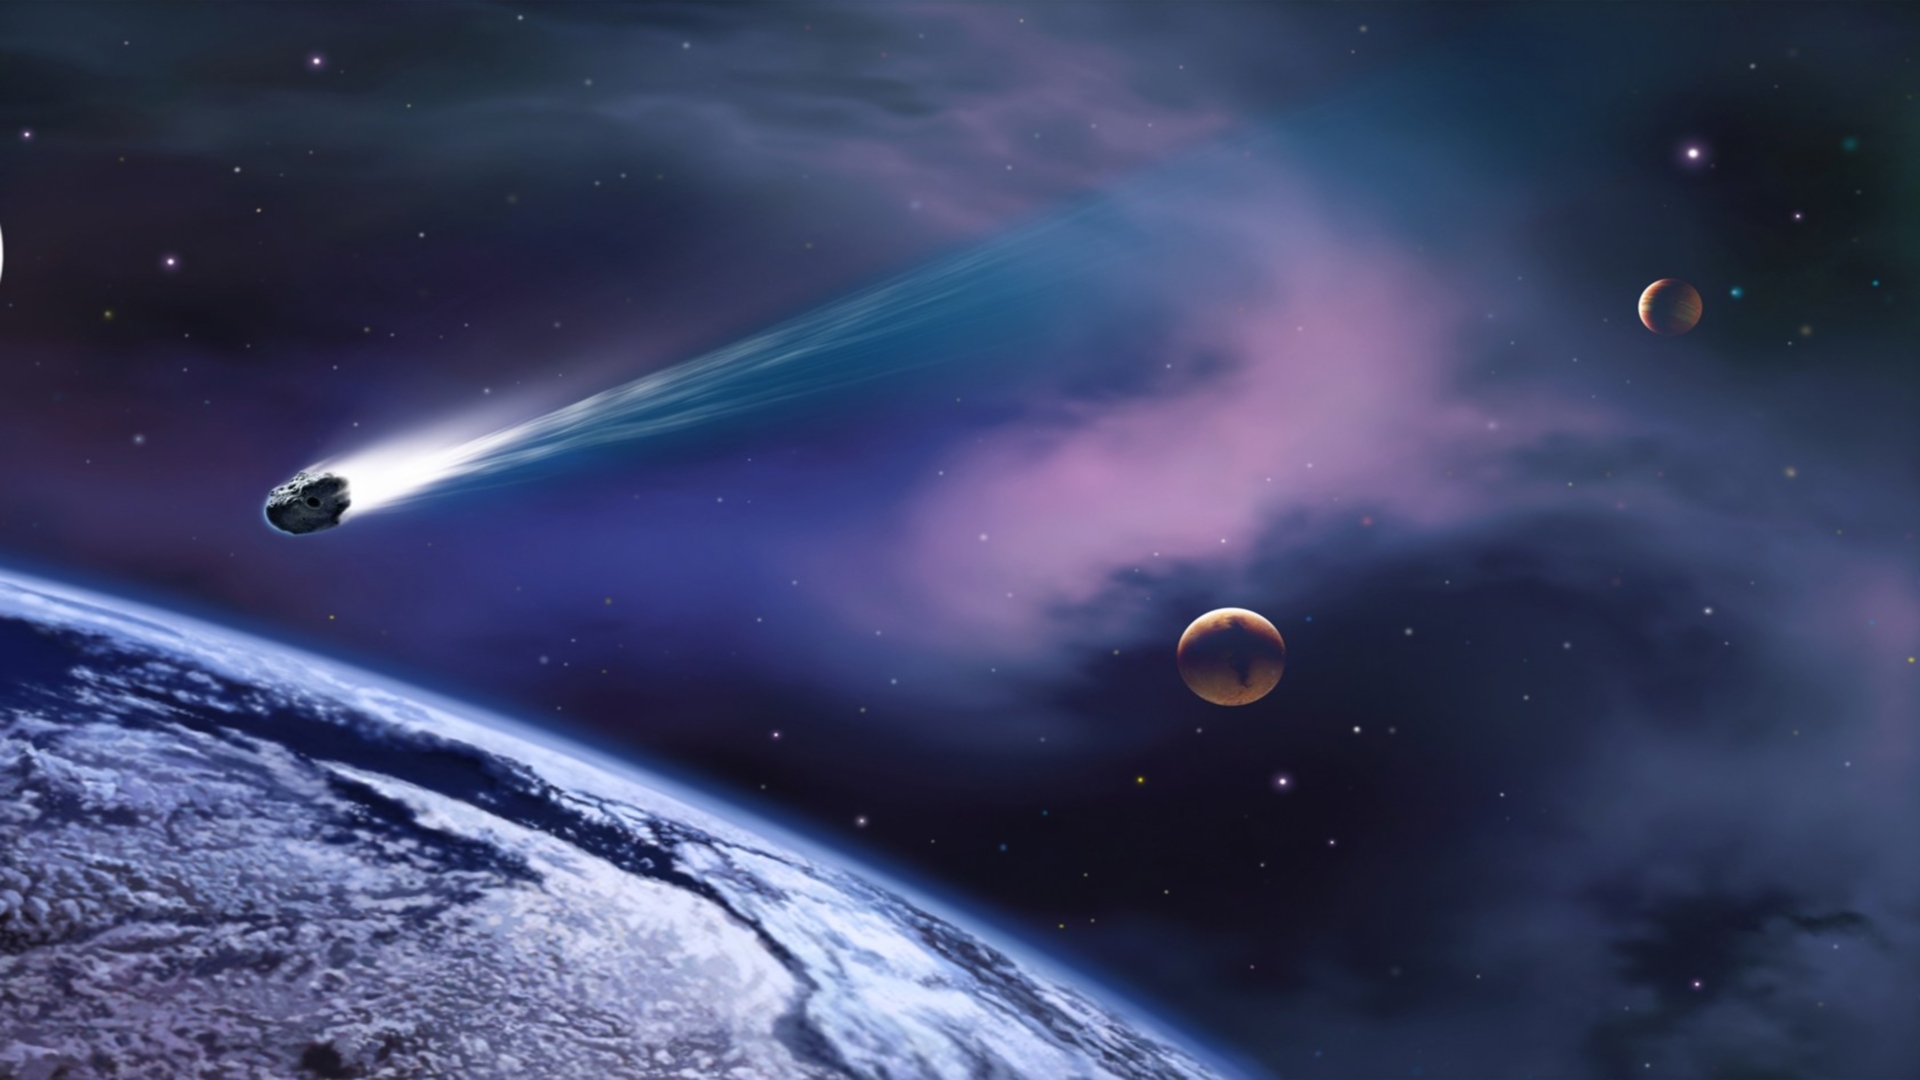 Here Are Some Awesome Space Wallpaper In HD For Your Desktop